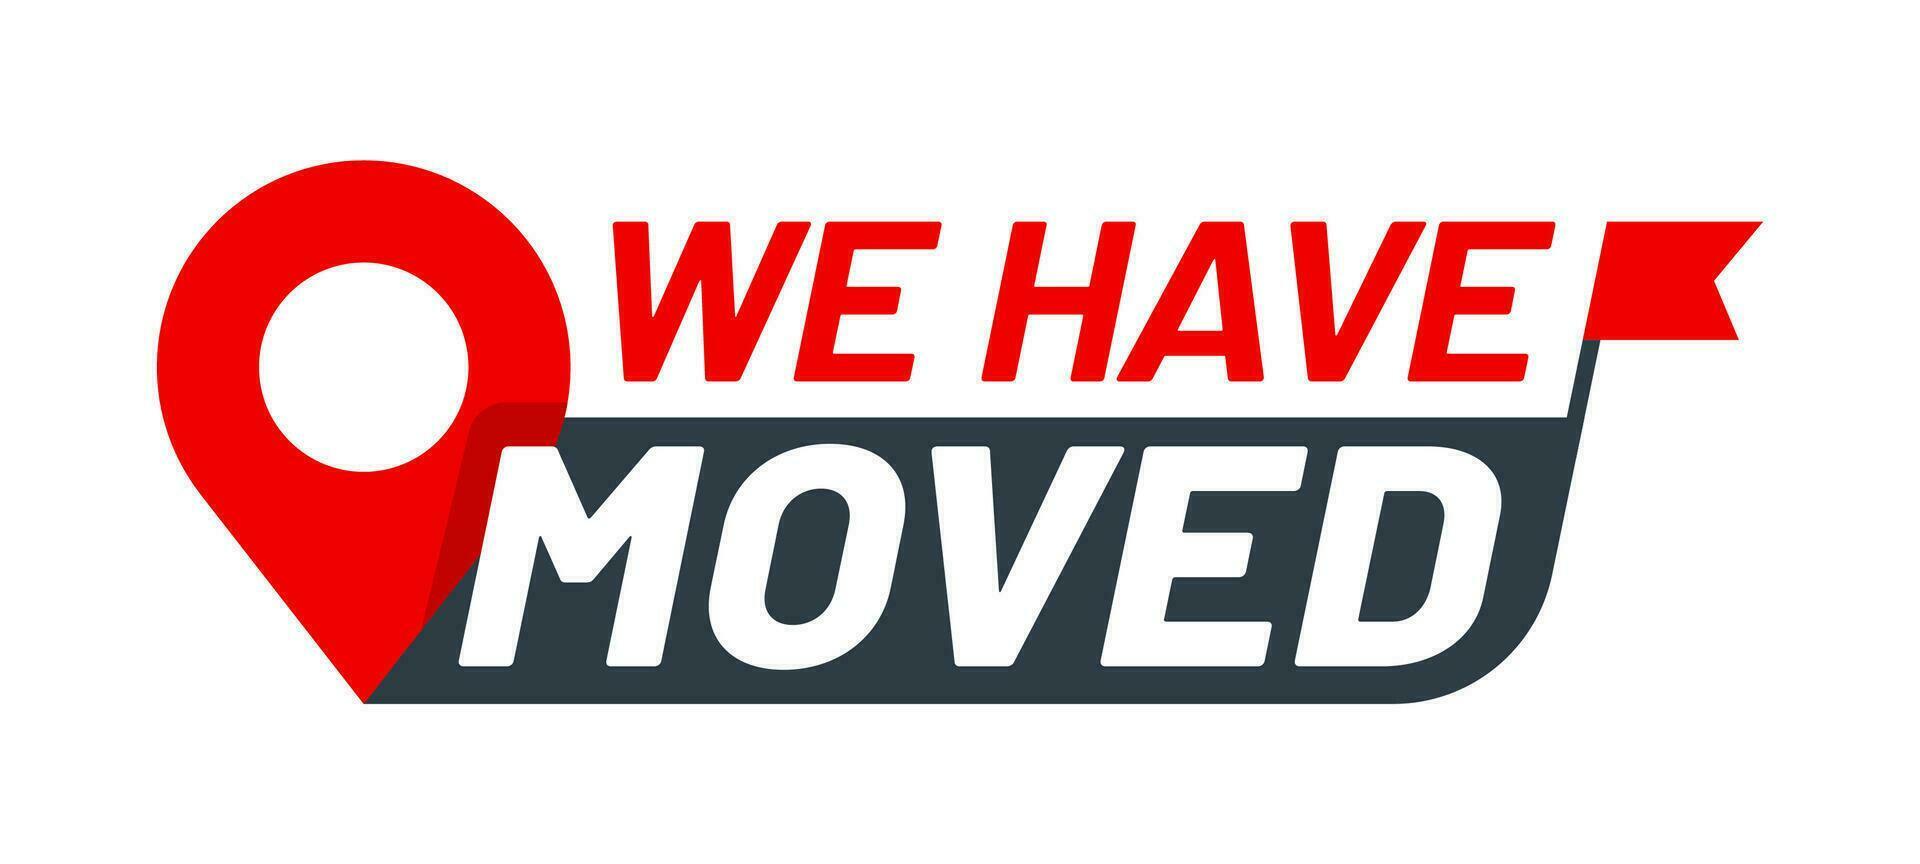 Have move icon. We have moved sign or banner vector